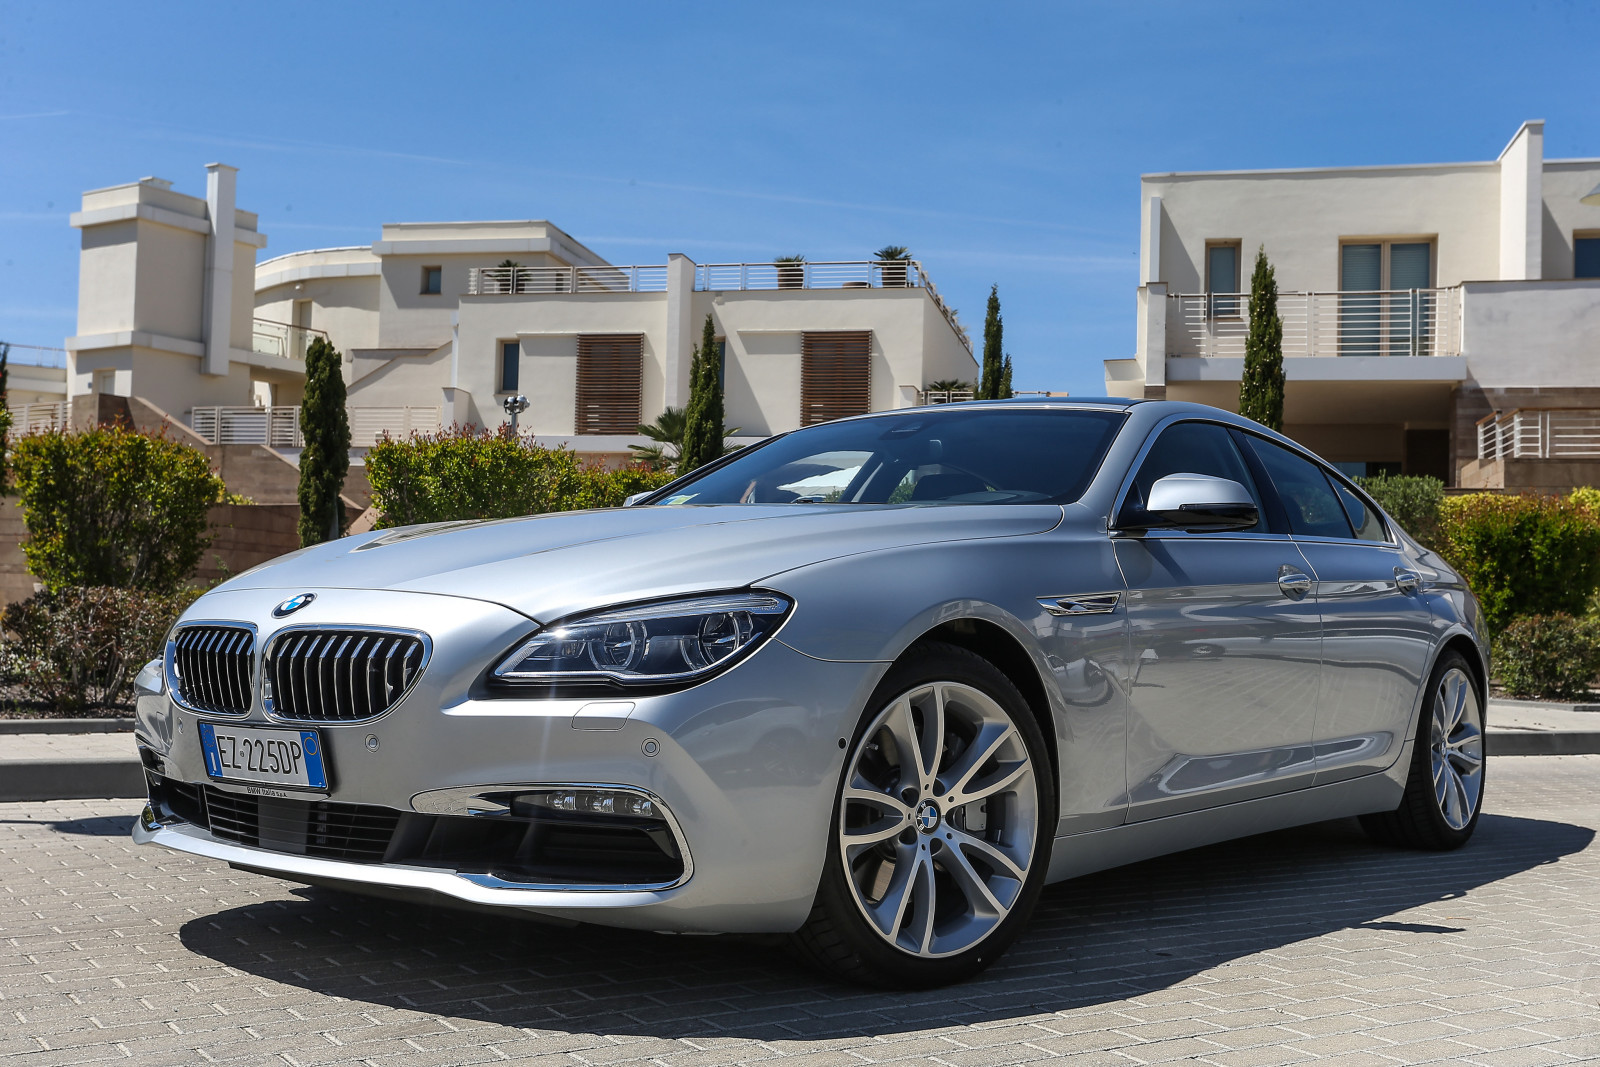 coupe, BMW, Gran Coupe, xDrive, 2015, F06, 640d